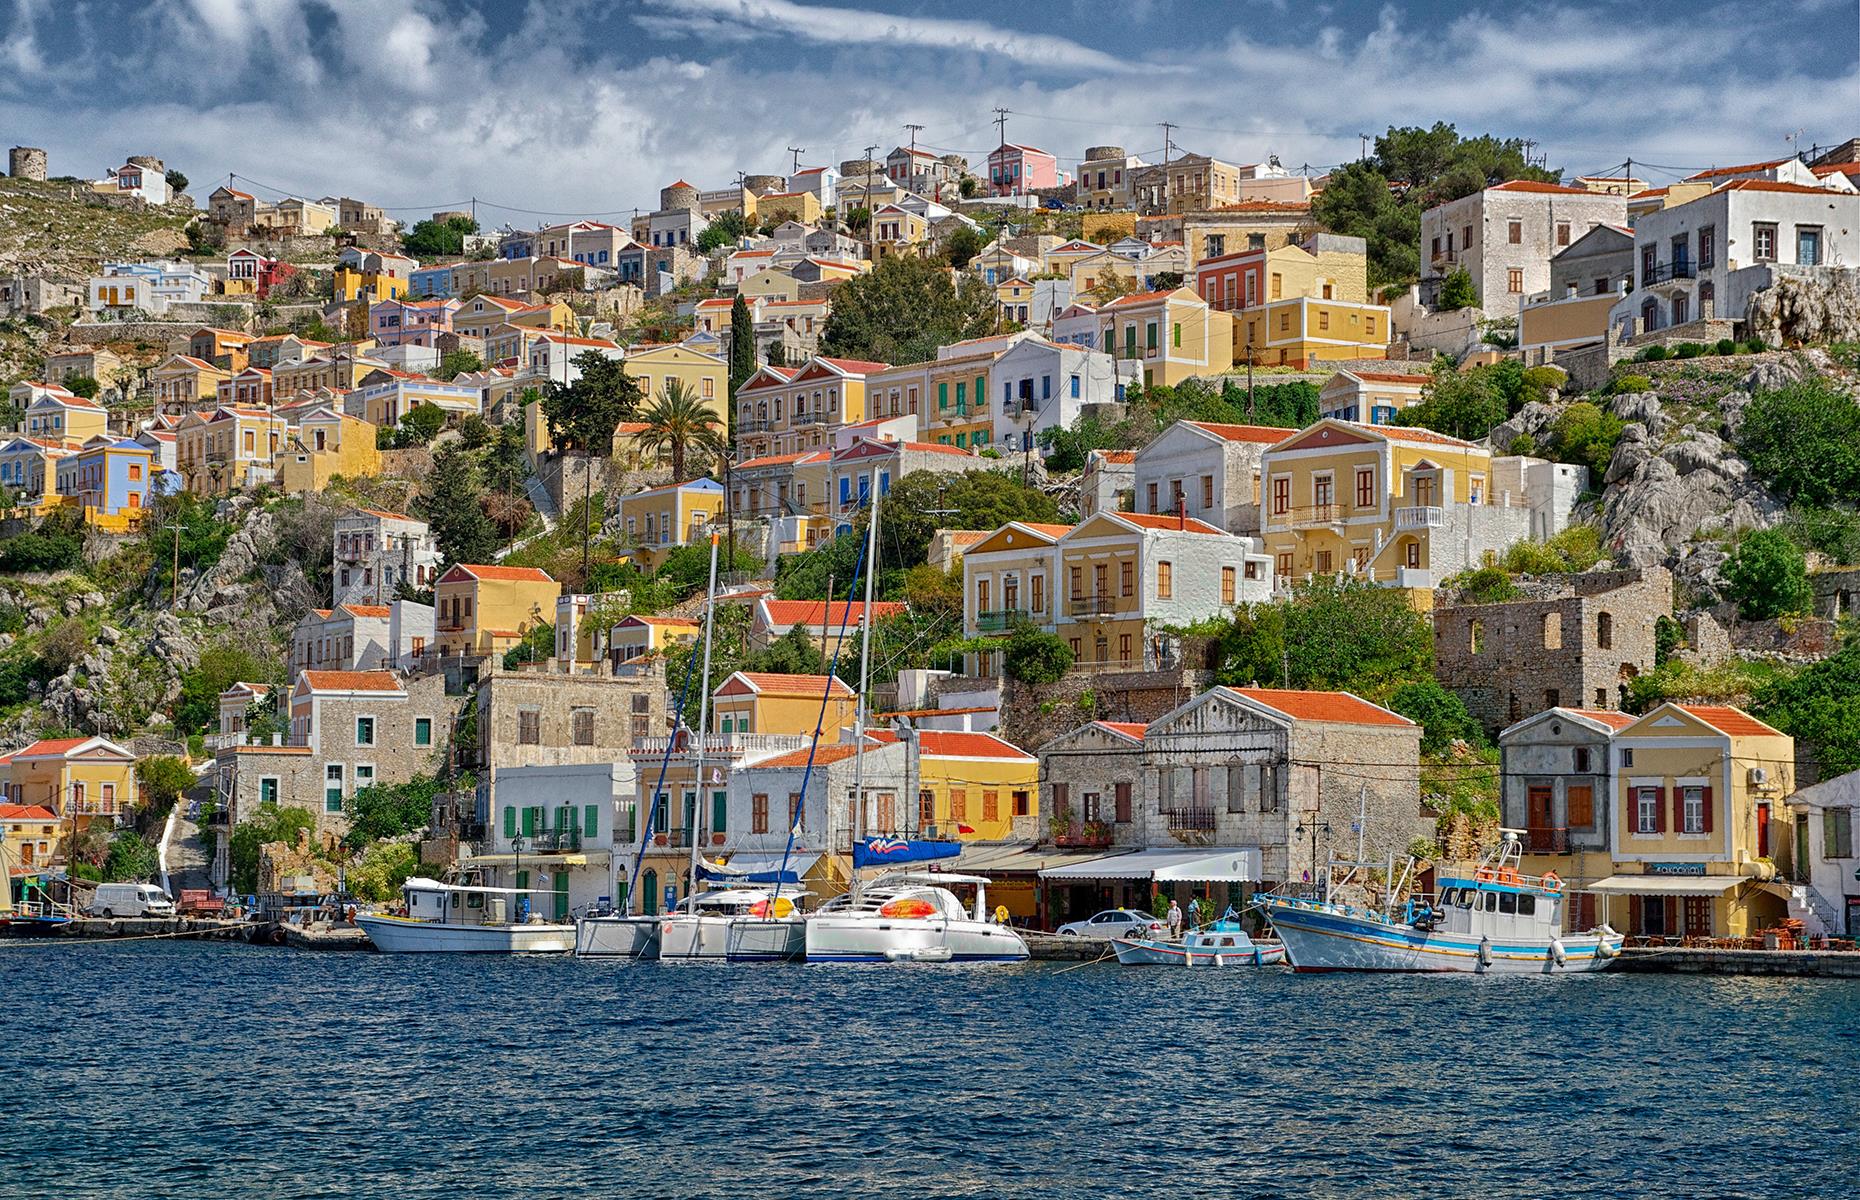 <p>It’s hard to choose among Greece’s 227 inhabited islands, but if you have to pick one, go for Symi. This small Dodecanese island has one of the prettiest ports, a riot of colorful houses tumbling to the water’s edge – not to mention excellent beaches. On the days when it's too hot to hike to the beach, just take a water taxi from Symi harbor.</p>  <p><strong><a href="https://www.loveexploring.com/galleries/184438/greeces-most-beautiful-small-towns-and-villages">Explore more of Greece's most gorgeous places</a></strong></p>